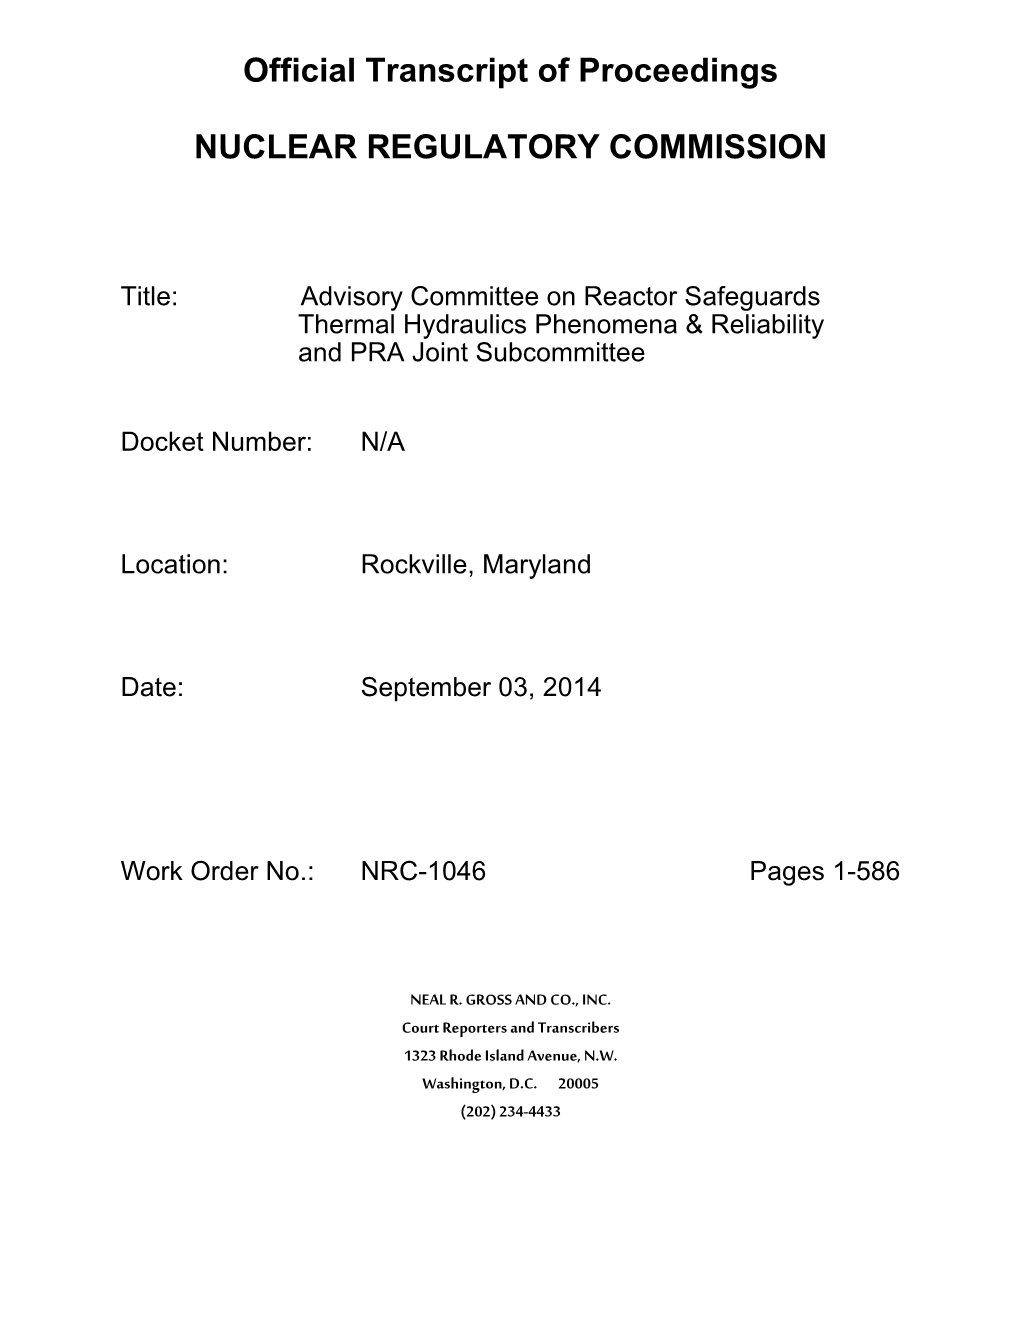 Transcript of the Advisory Committee on Reactor Safeguards Thermal